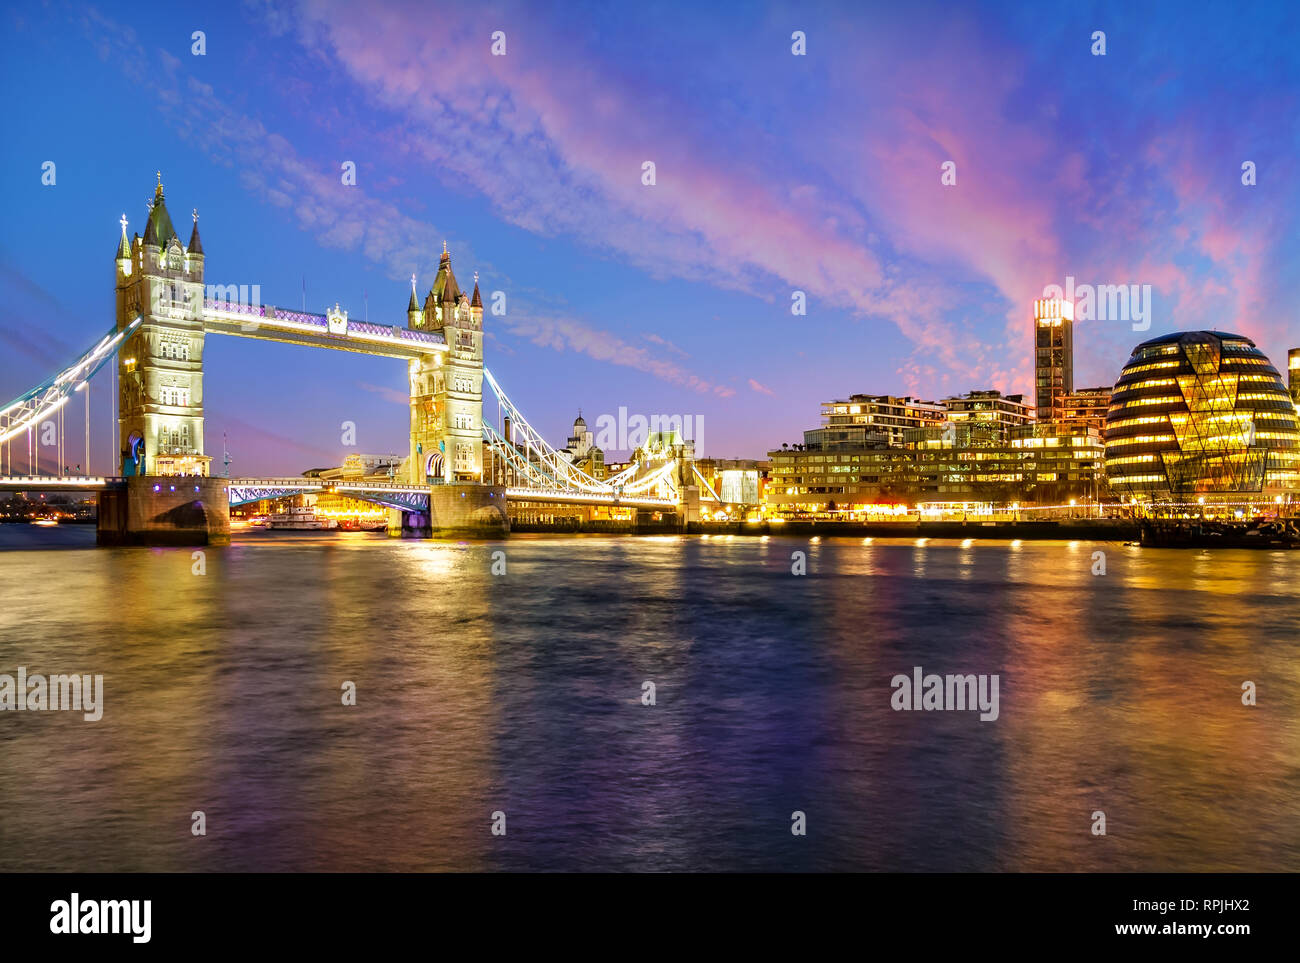 London cityscape at night with famous Tower Bridge illuminated and reflected in Thames river in England - UK Stock Photo